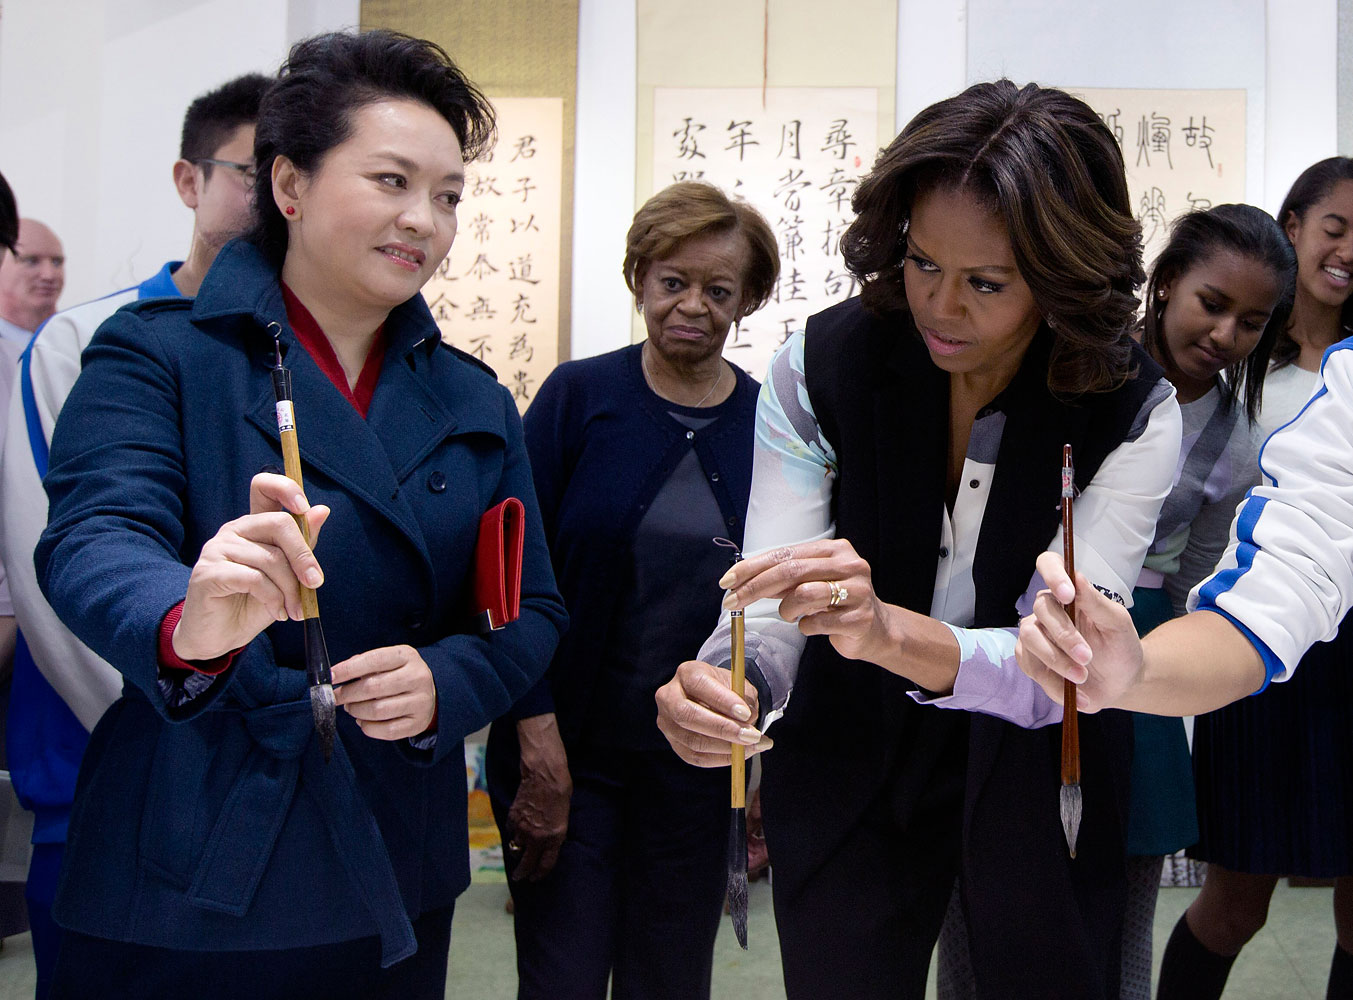 Peng Liyuan, wife of Chinese President Xi Jinping shows U.S. first lady Michelle Obama how to hold a writing brush as they visit a Chinese traditional calligraphy class at the Beijing Normal School, a school that prepares students to go abroad in Beijing, March 21, 2014. (Andy Wong—AP)